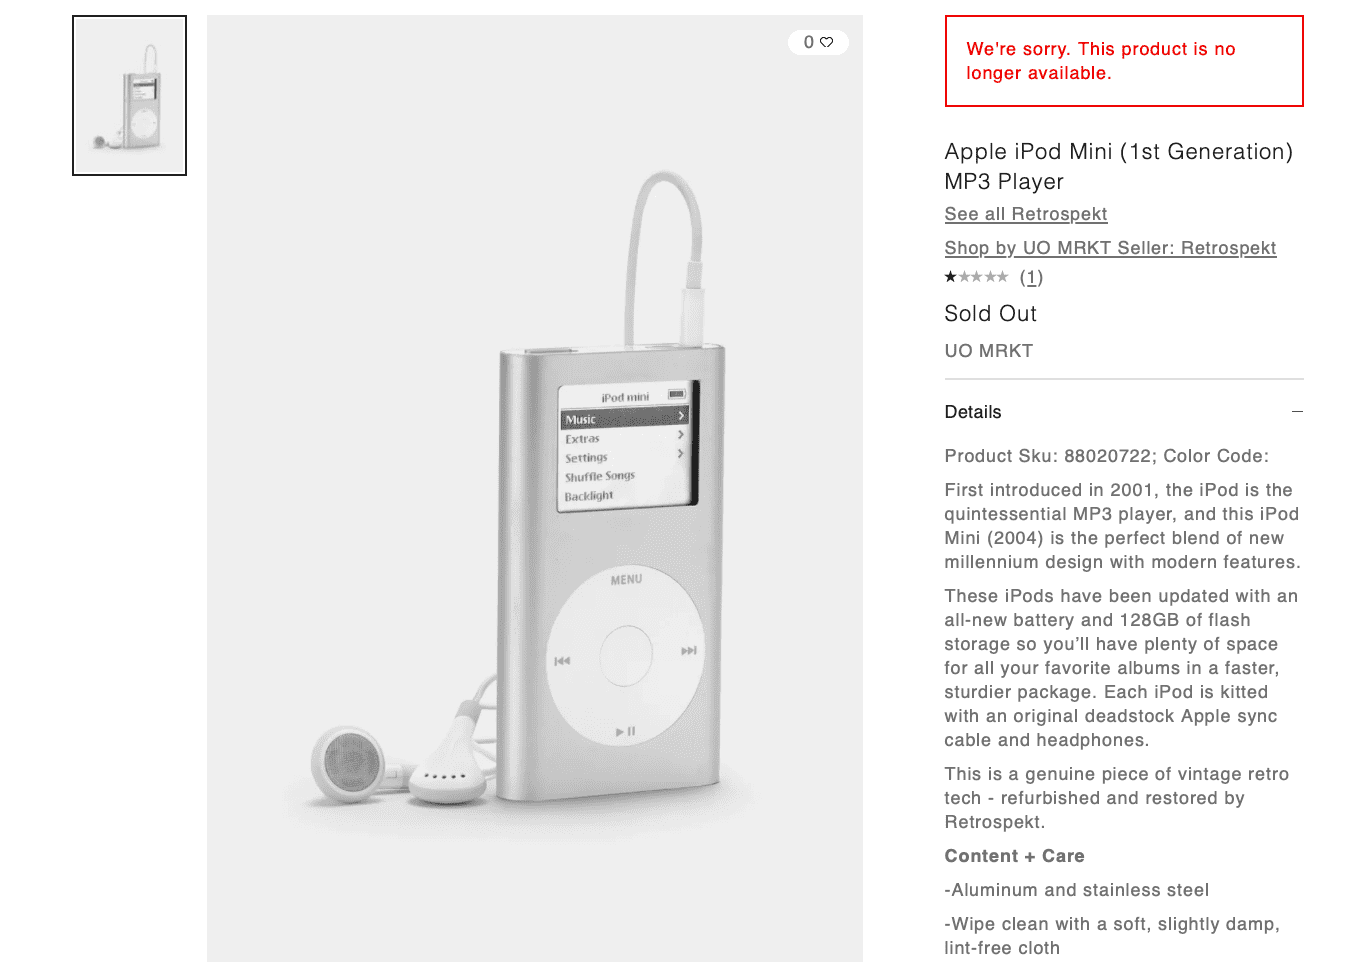 Urban Outfitters sells 'vintage' iPod's